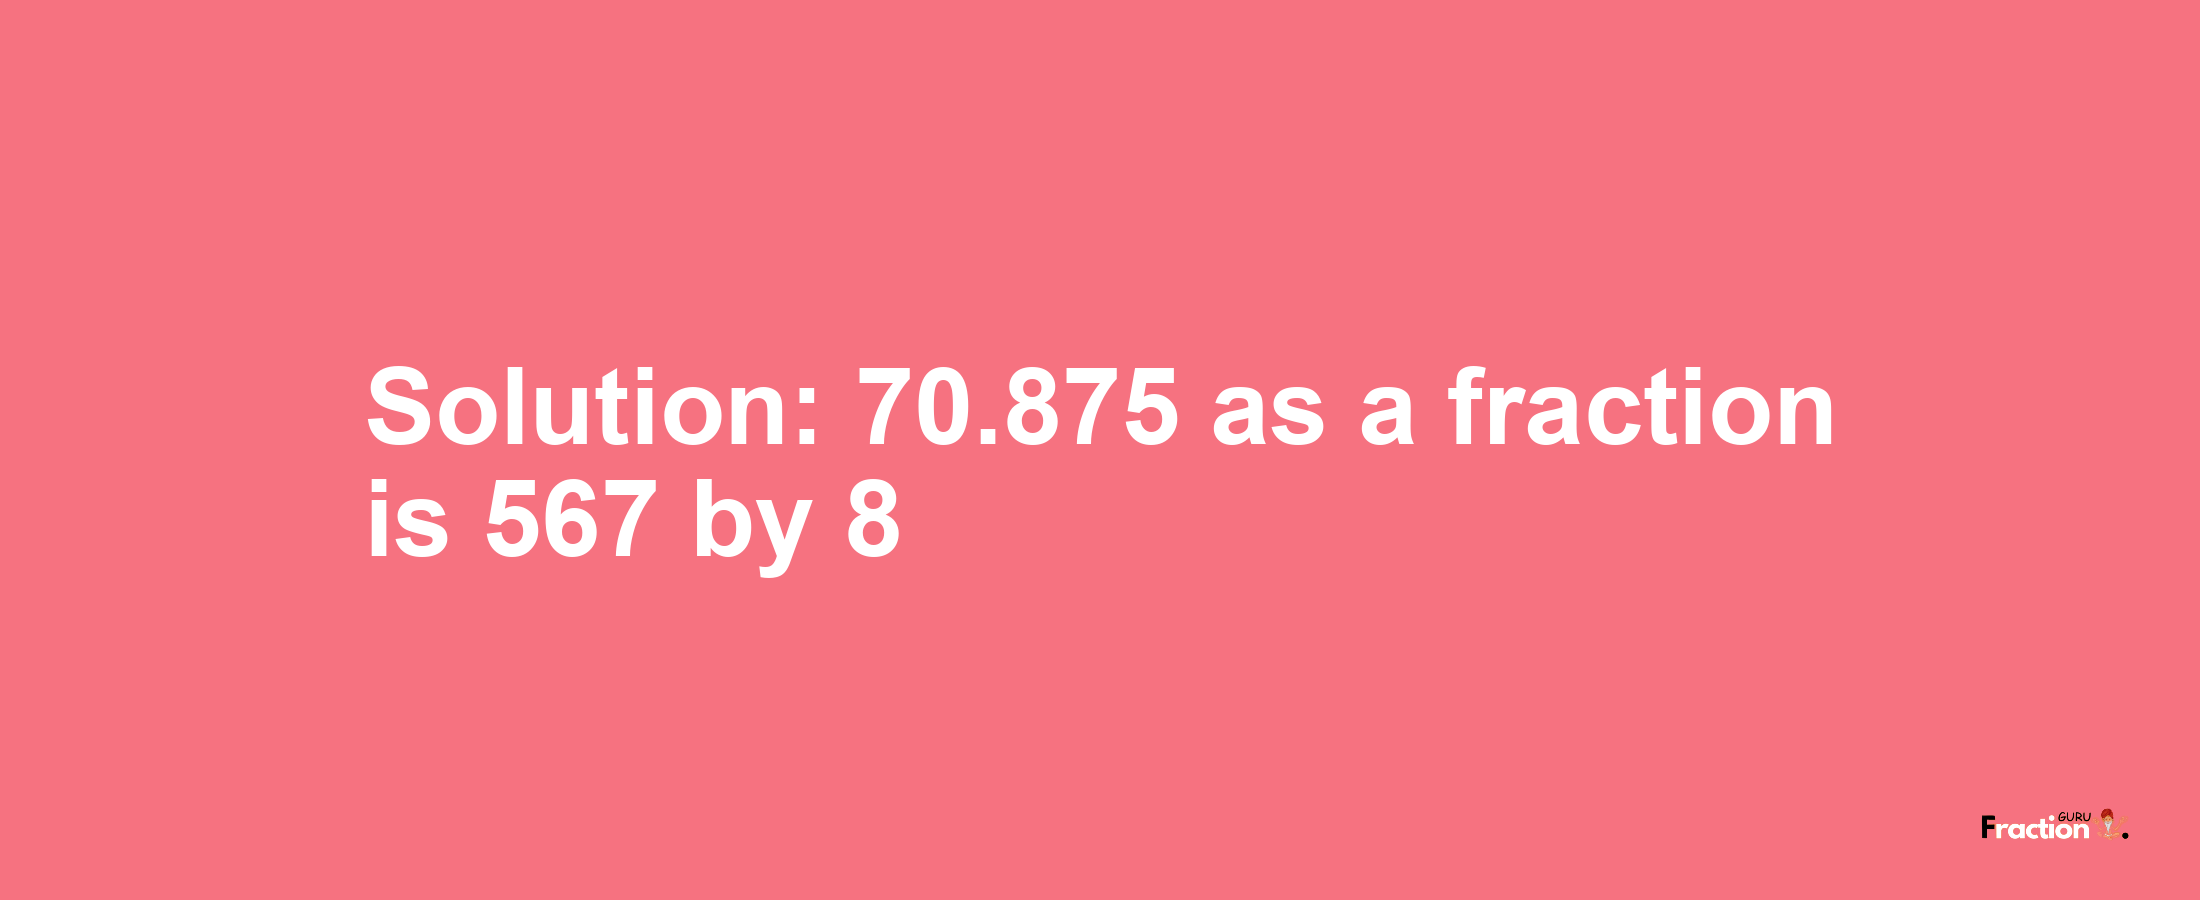 Solution:70.875 as a fraction is 567/8